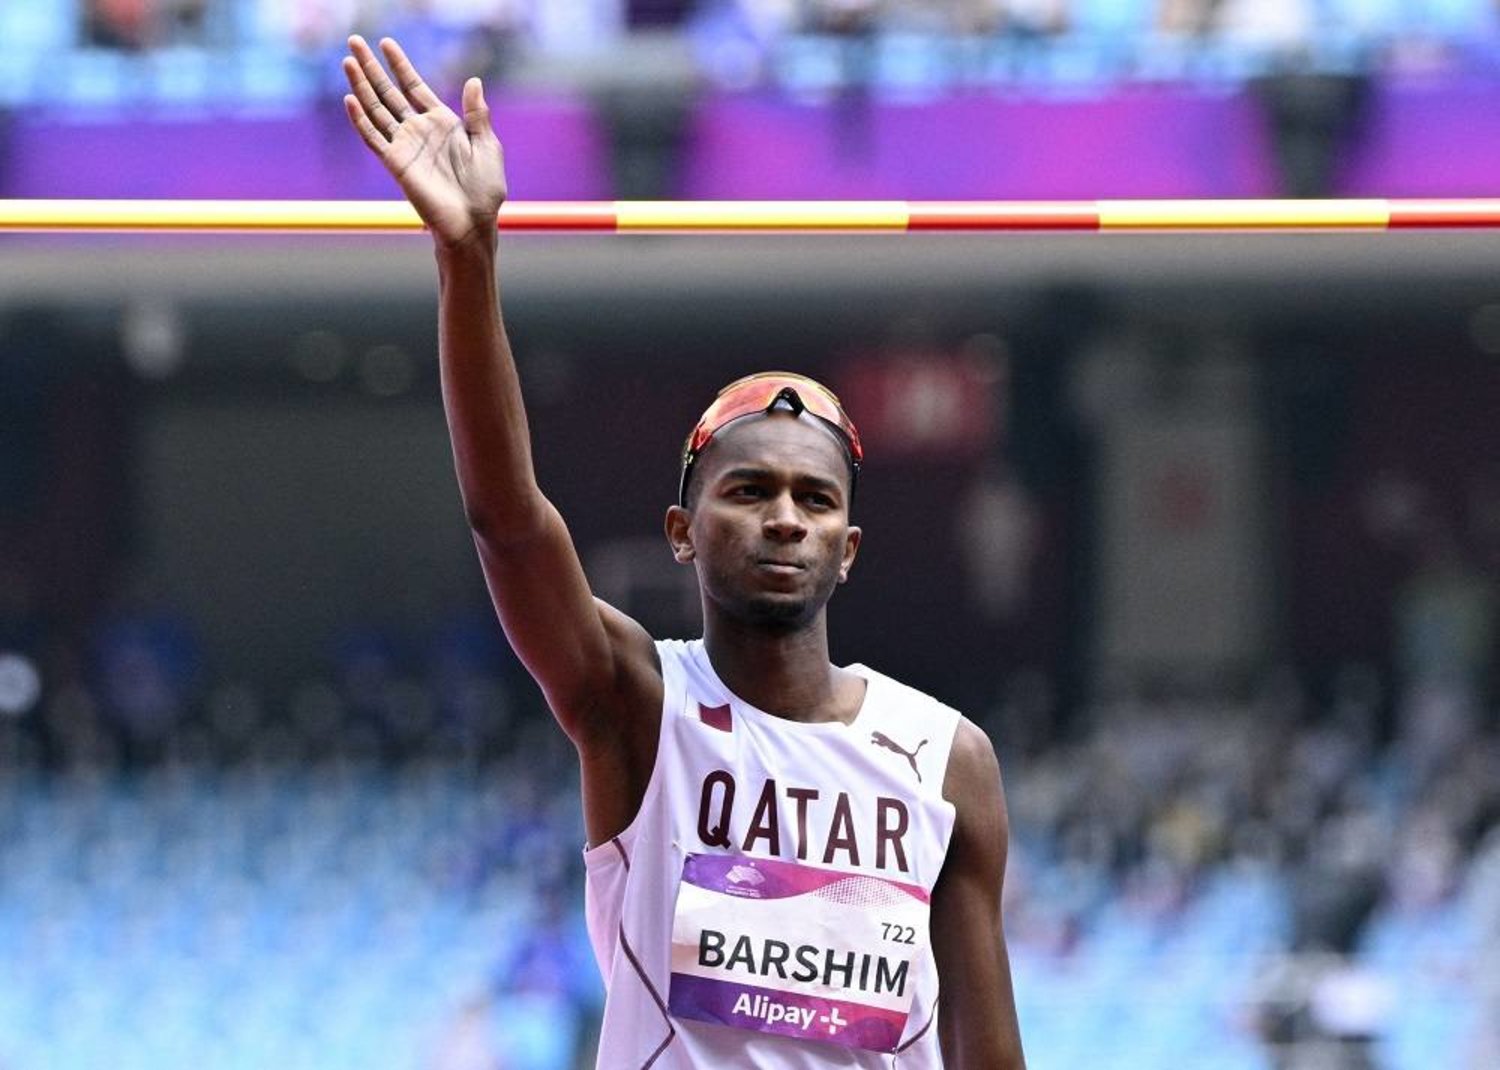 Mutaz Barshim announces launch of thrilling ‘What Gravity Challenge’ featuring world’s best high jumpers